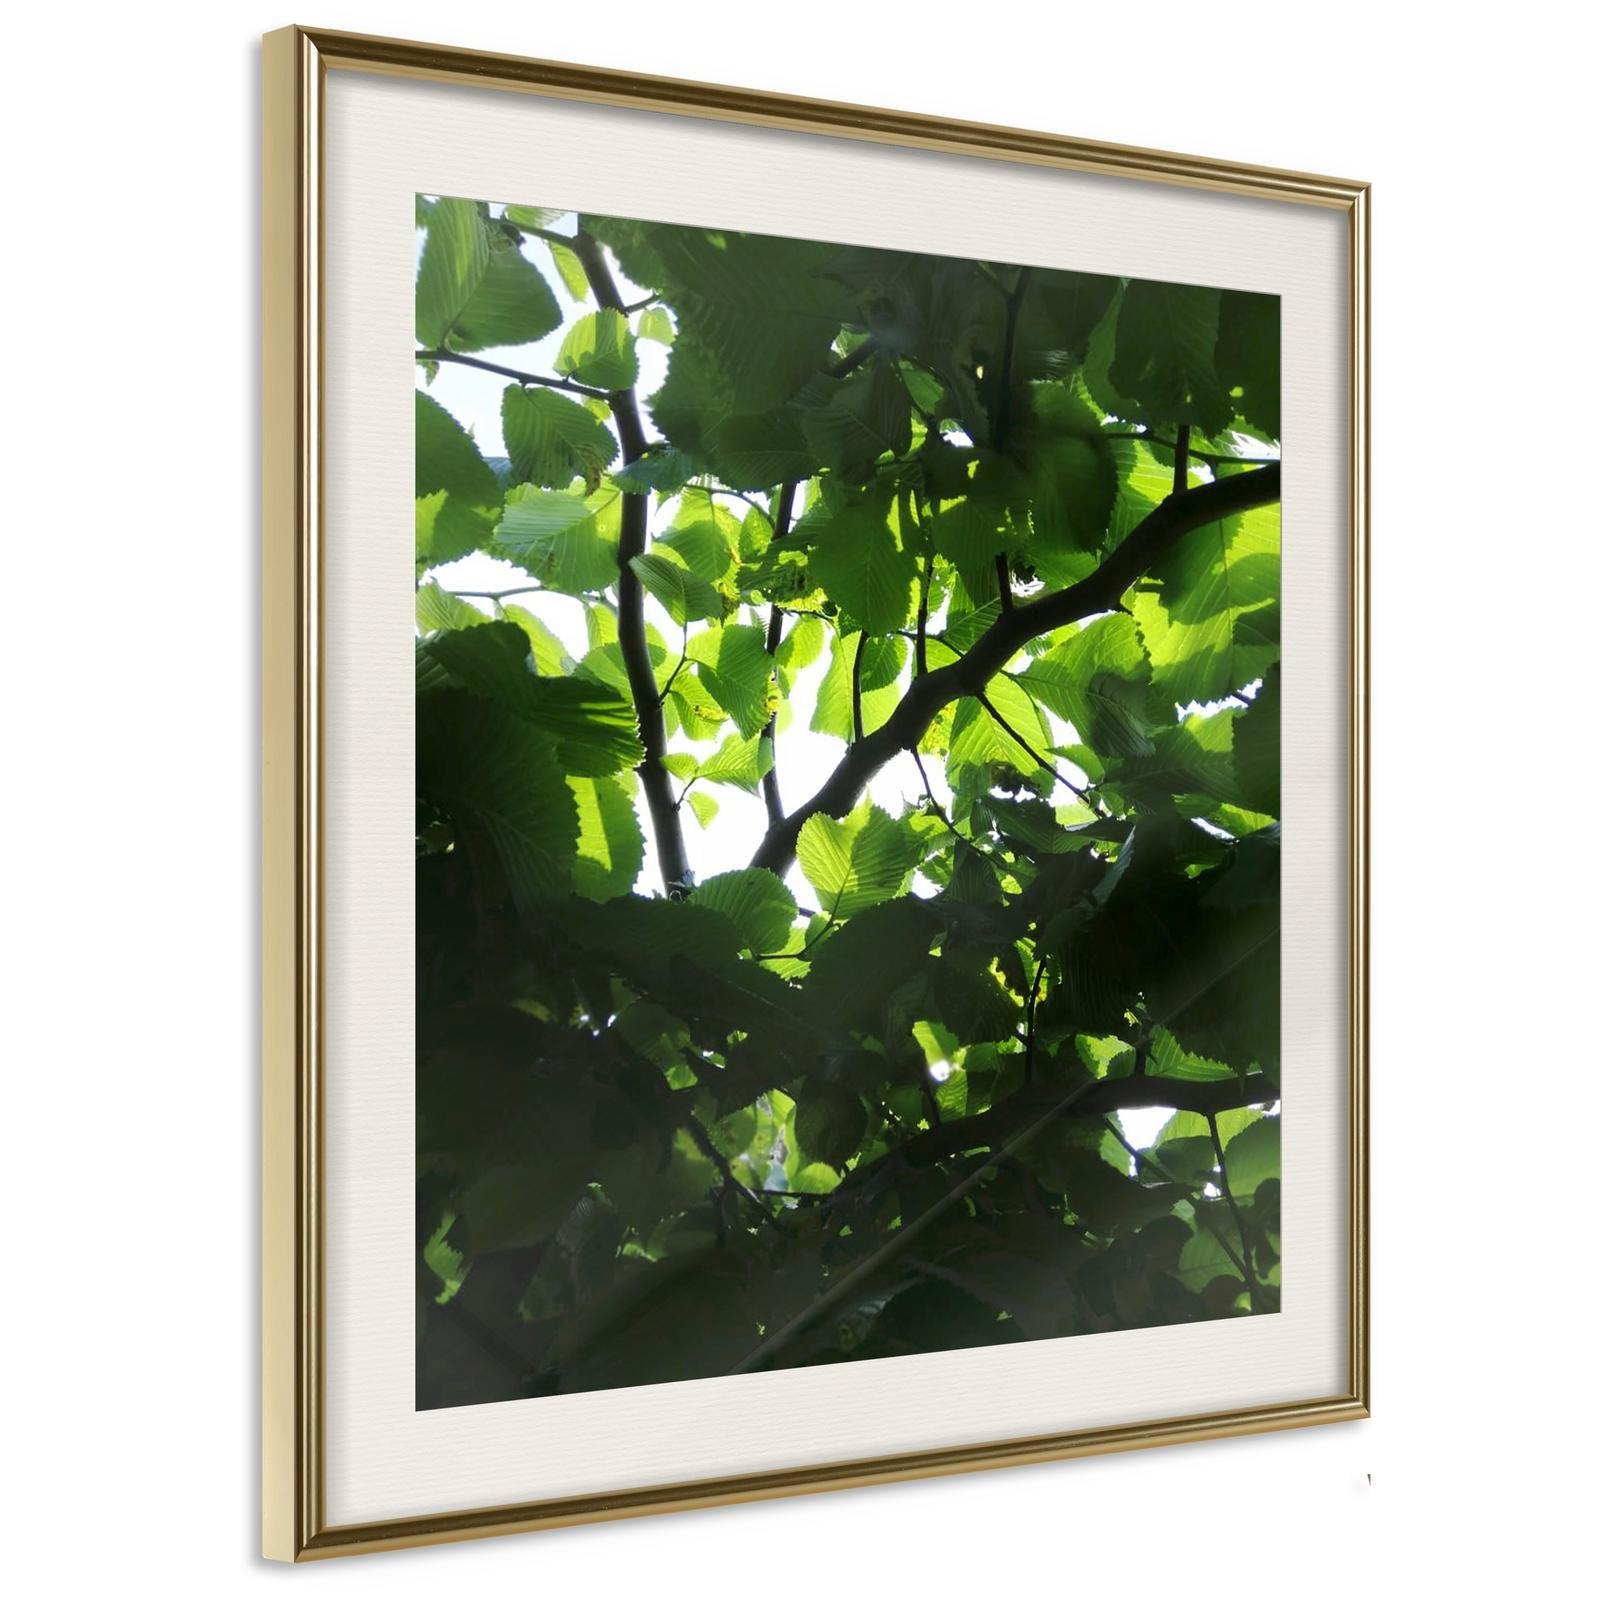 Inramad Poster / Tavla - Under Cover of Leaves-Poster Inramad-Artgeist-20x20-Guldram med passepartout-peaceofhome.se